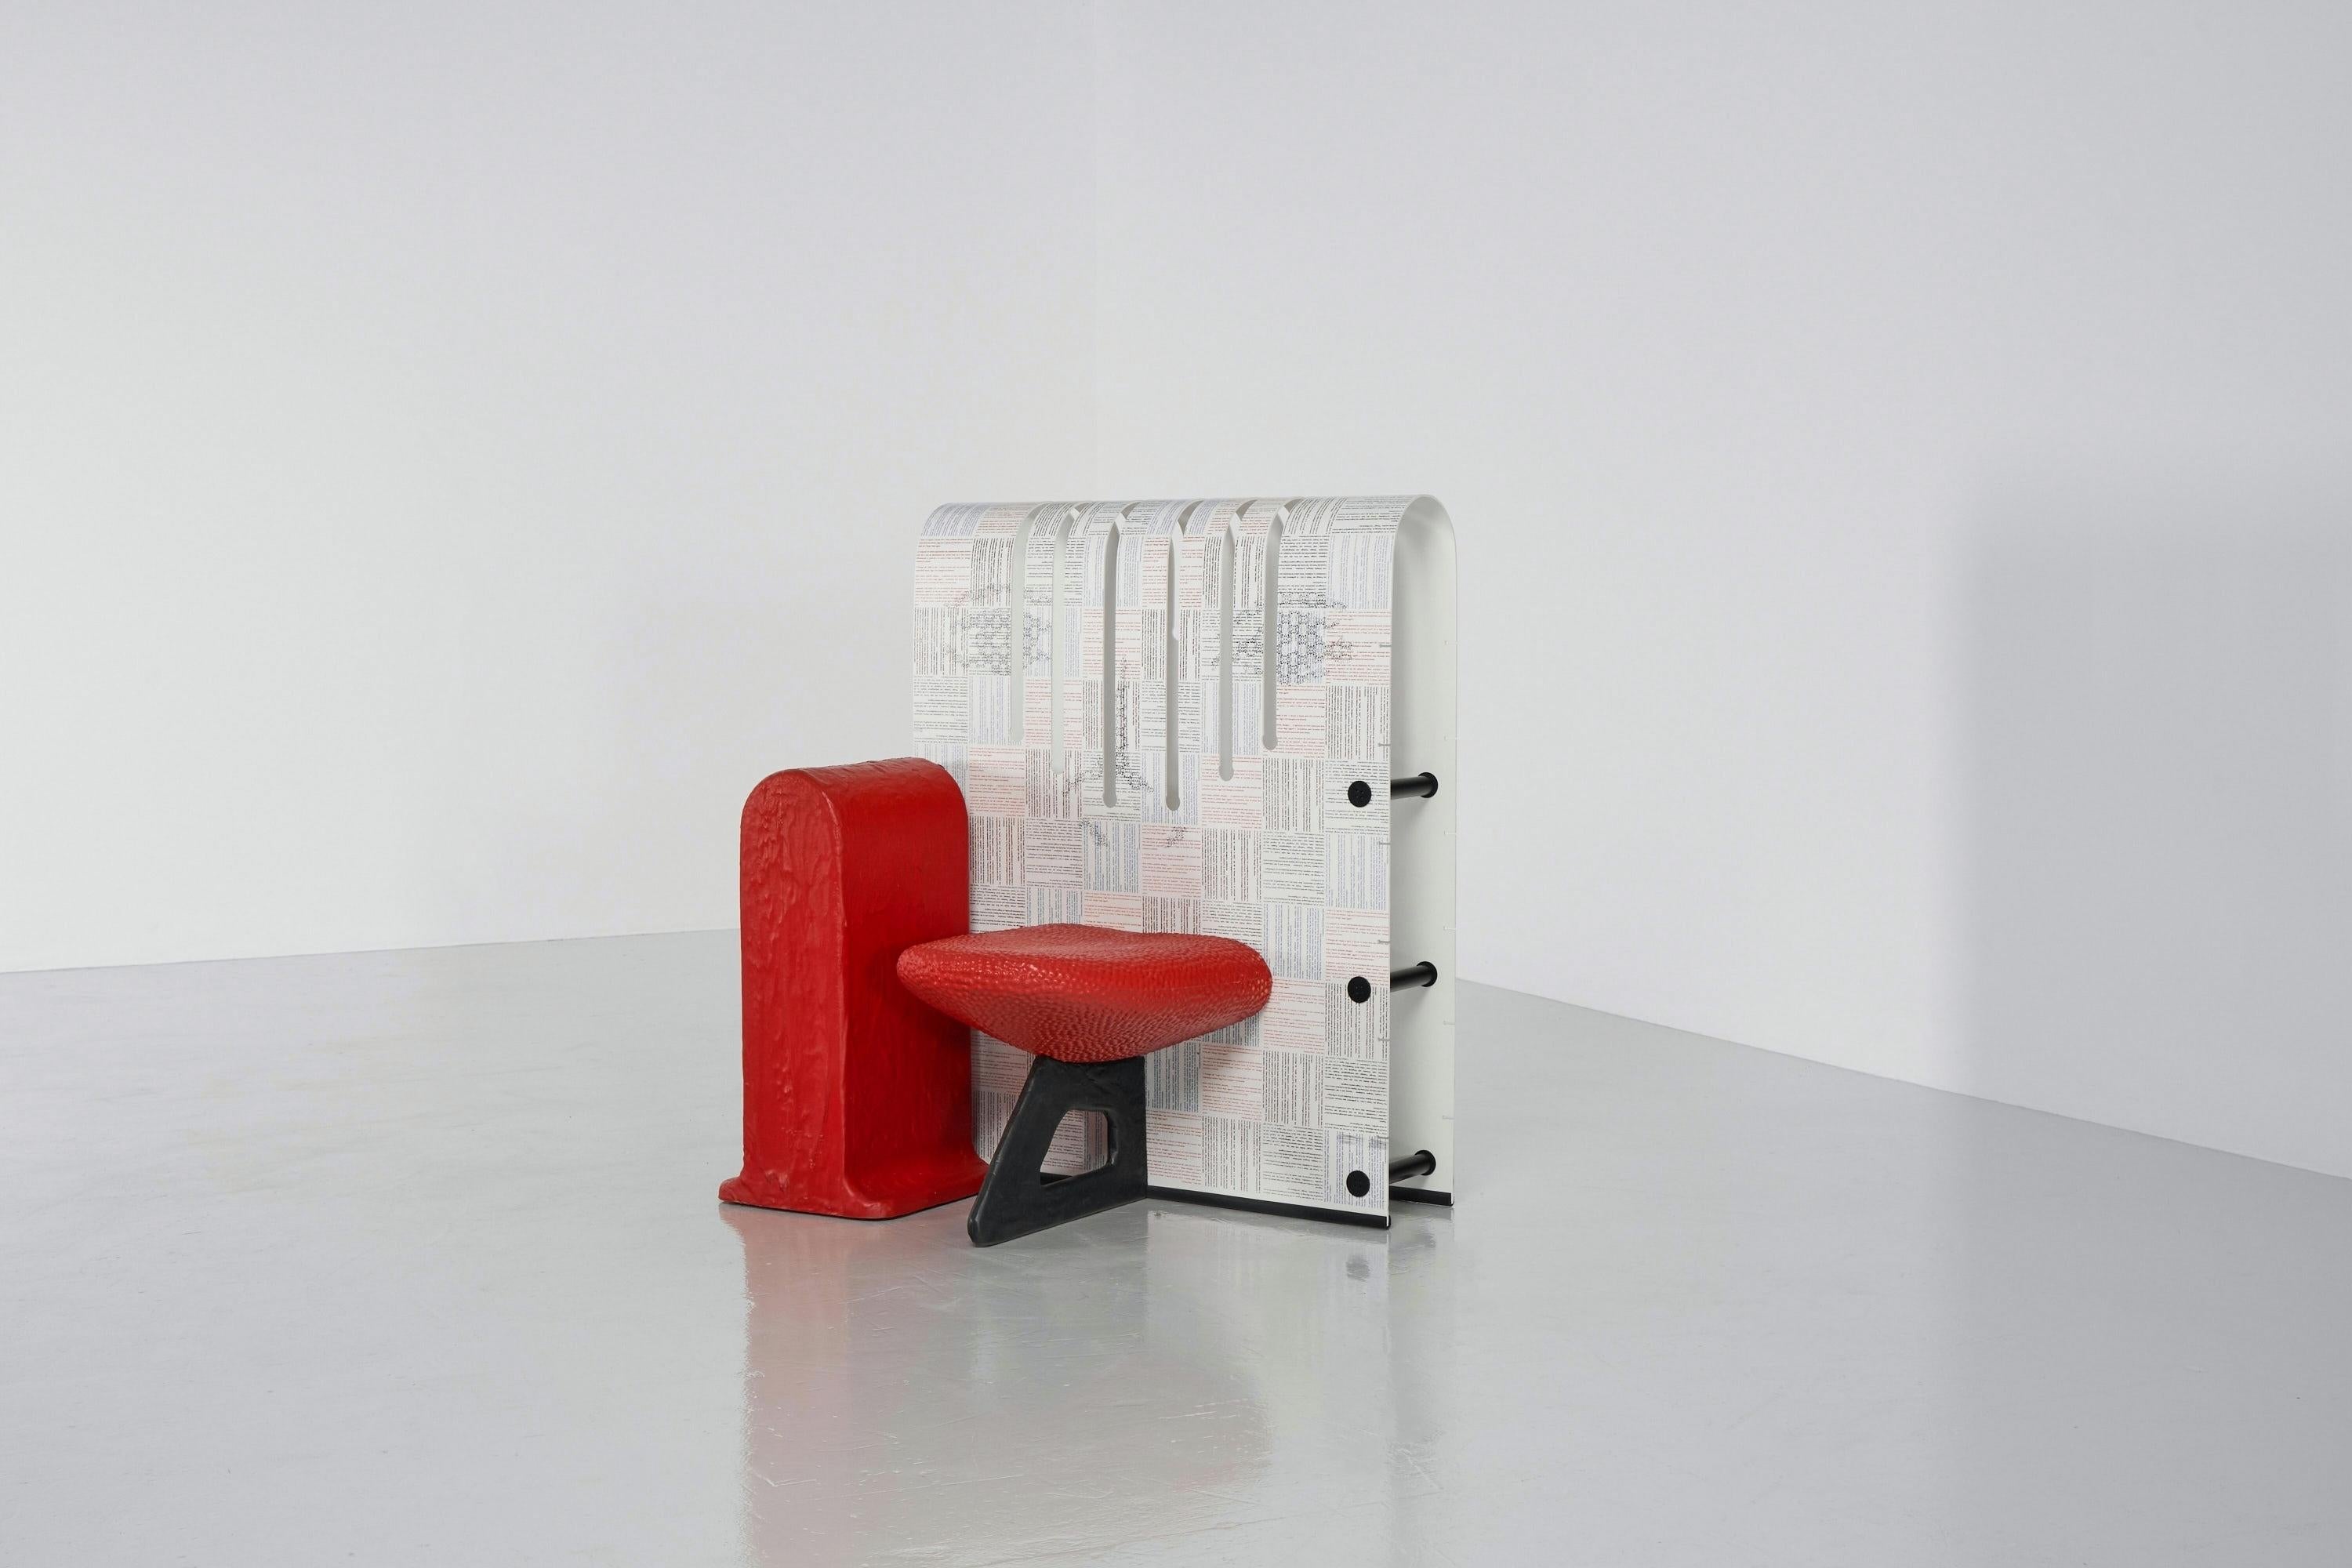 Postmodern chair designed by Gaetano Pesce and manufactured by Meritalia, Italy 2003. This unique shaped chair is more of a sculpture and fits perfectly in the oeuvre from Pesce, with playful interesting shapes. A mix of materials with a focus on